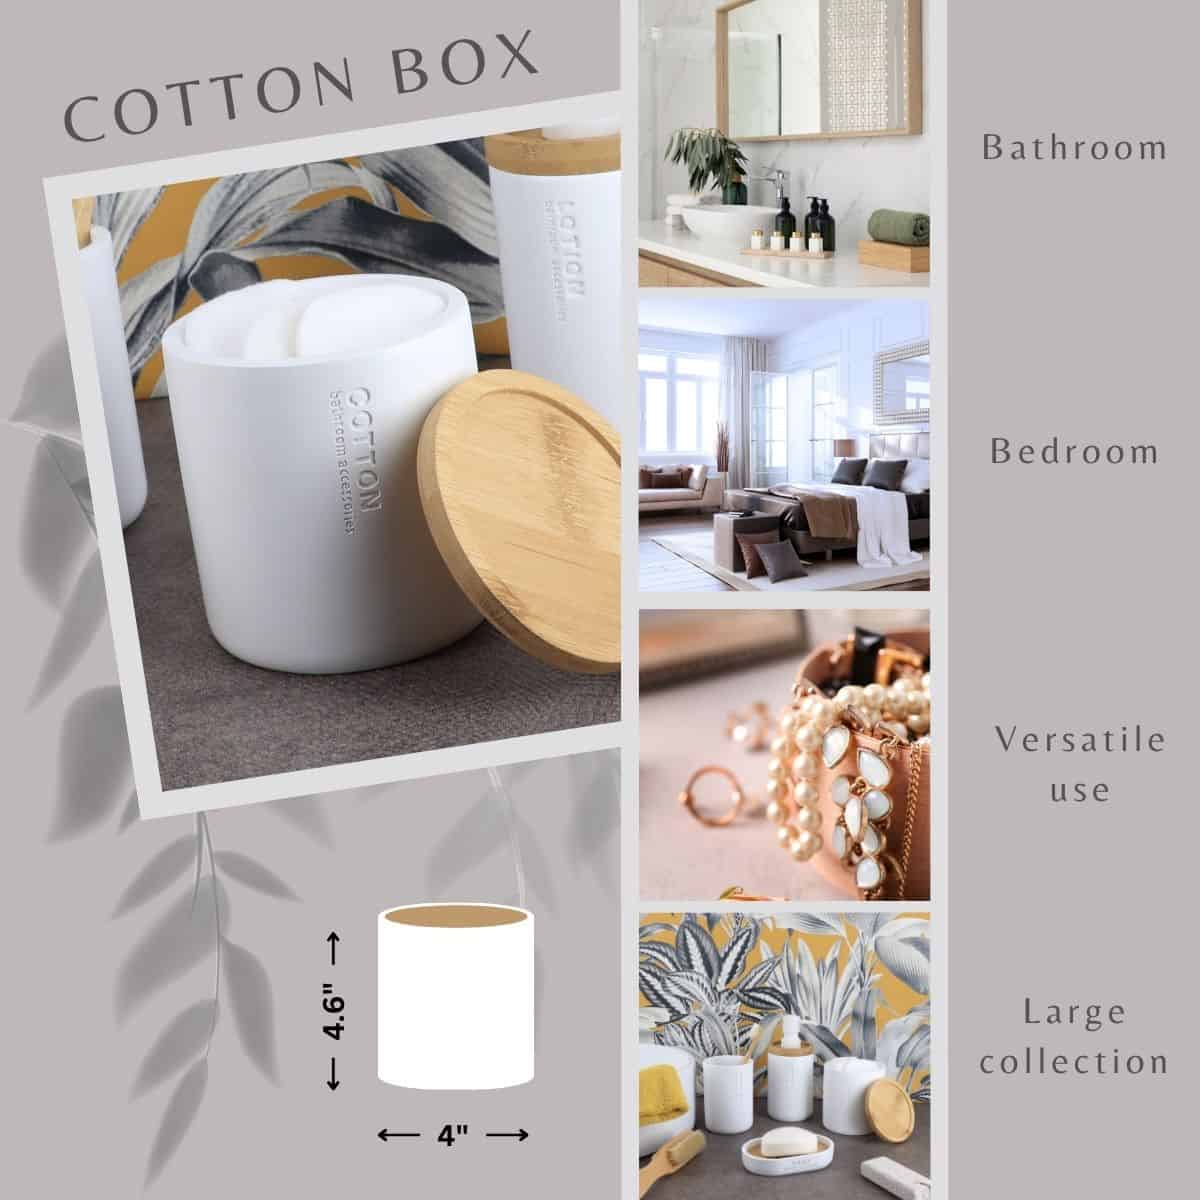 Versatile wooden pearl white cotton box for bathroom bedroom swabs pads balls jewels beauty accessories